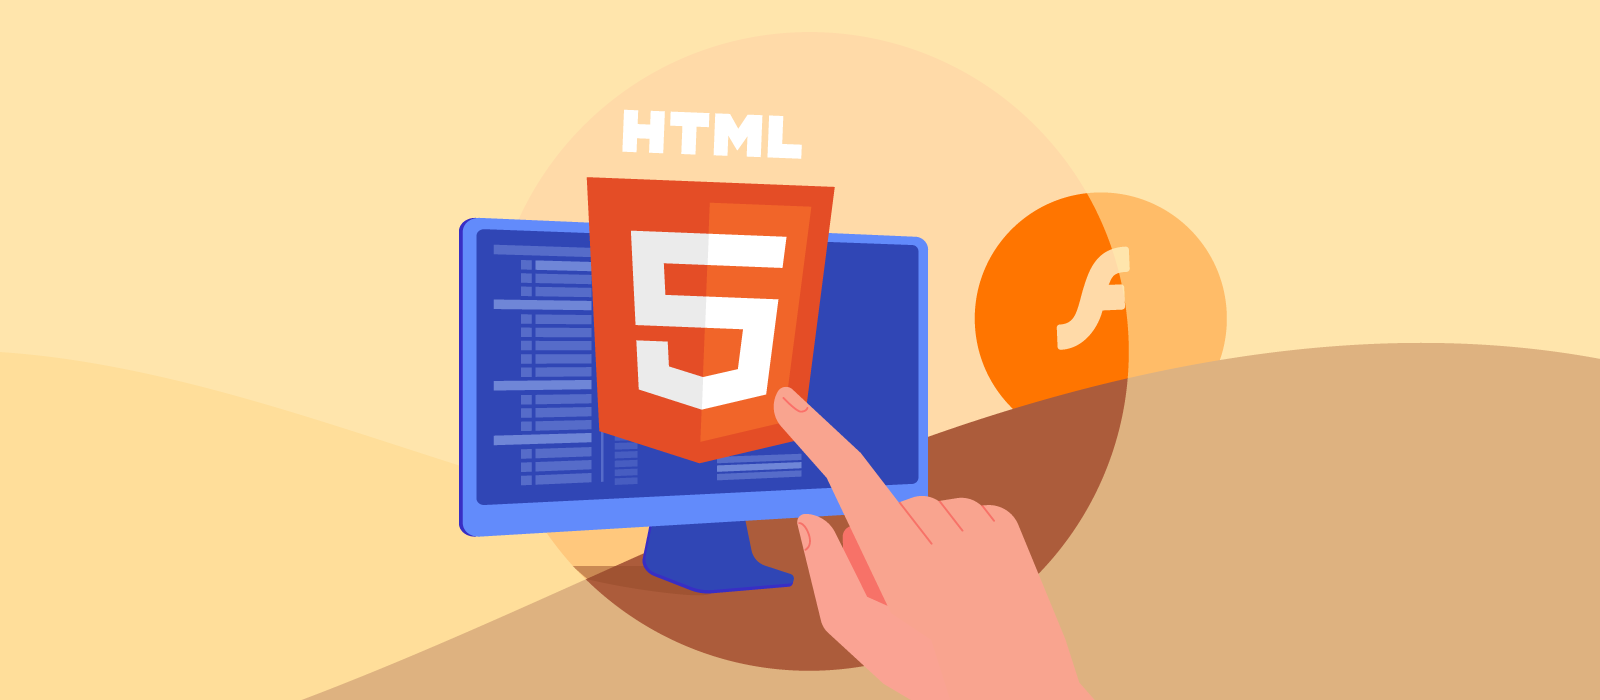 Flash Finally Gone in 2020: tools to convert Flash to HTML5 in 2021